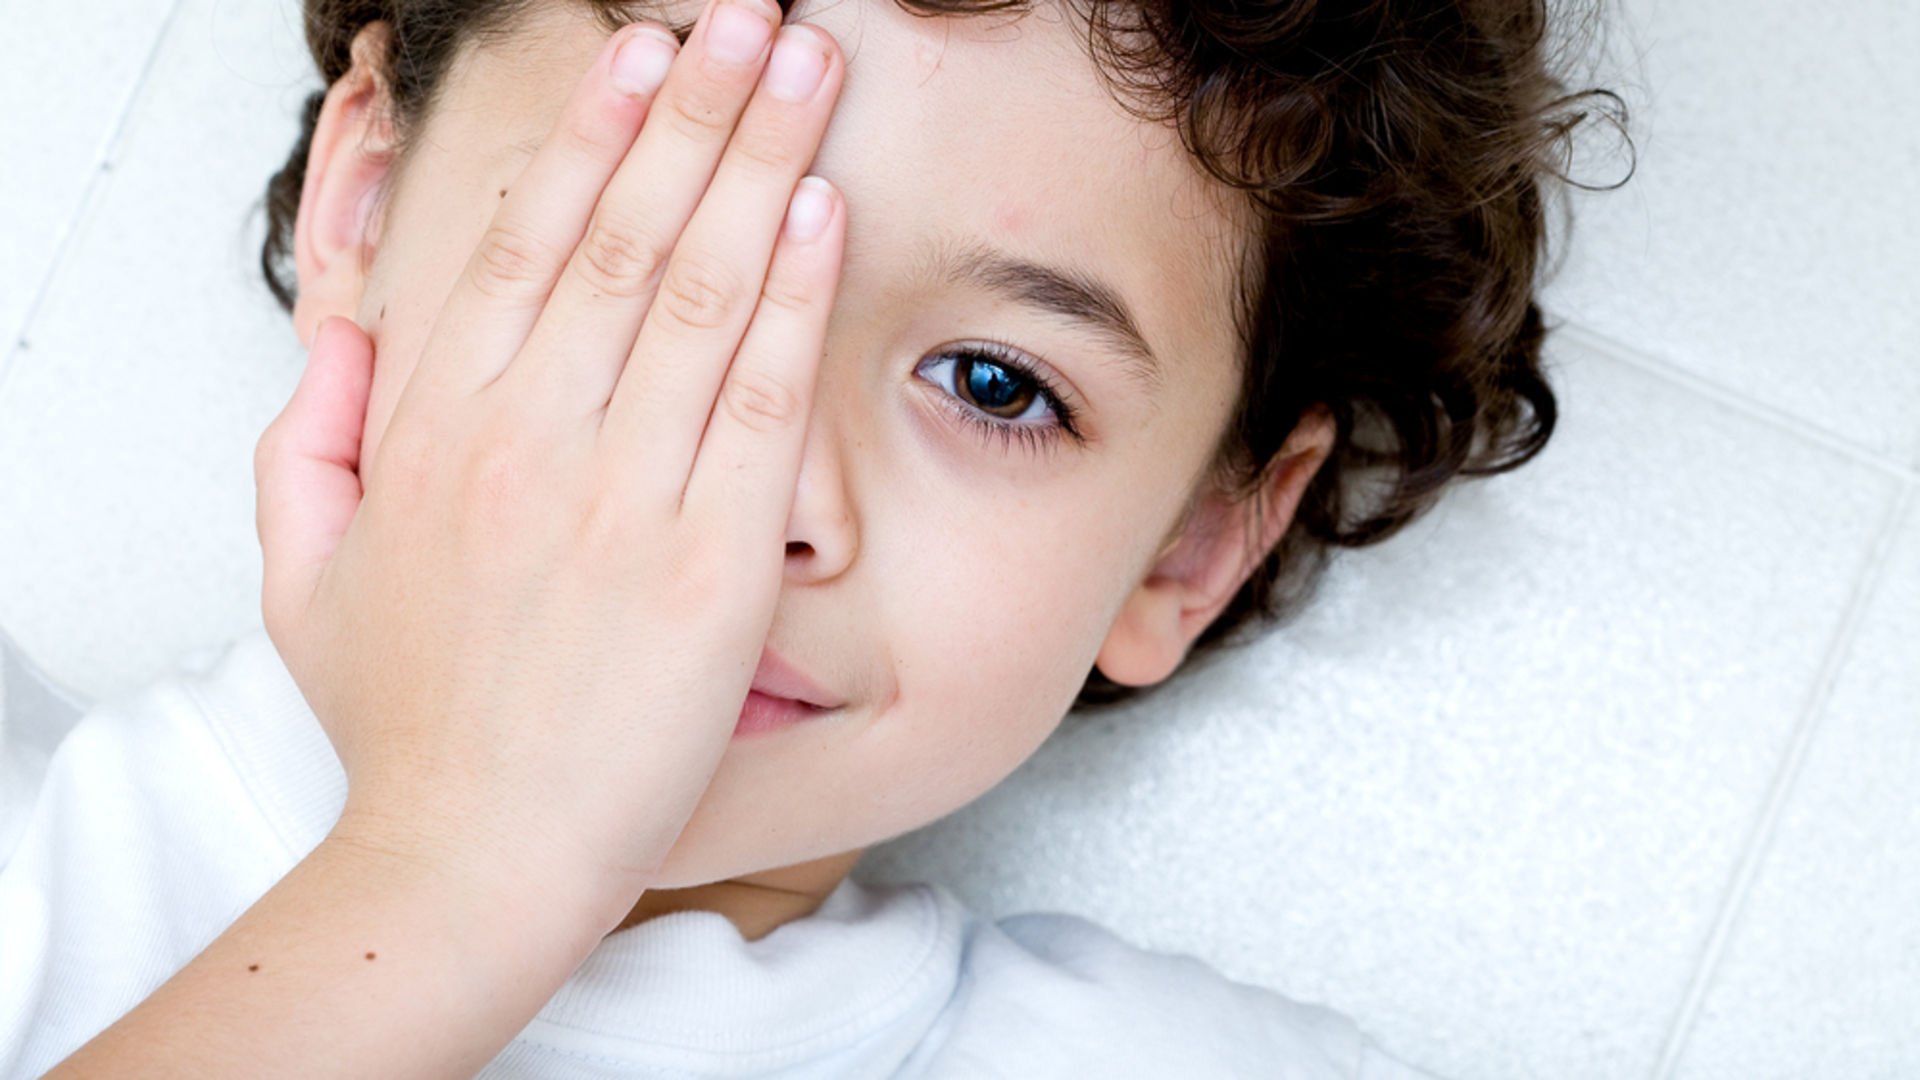 The rate of myopia in children has increased 3 times #2